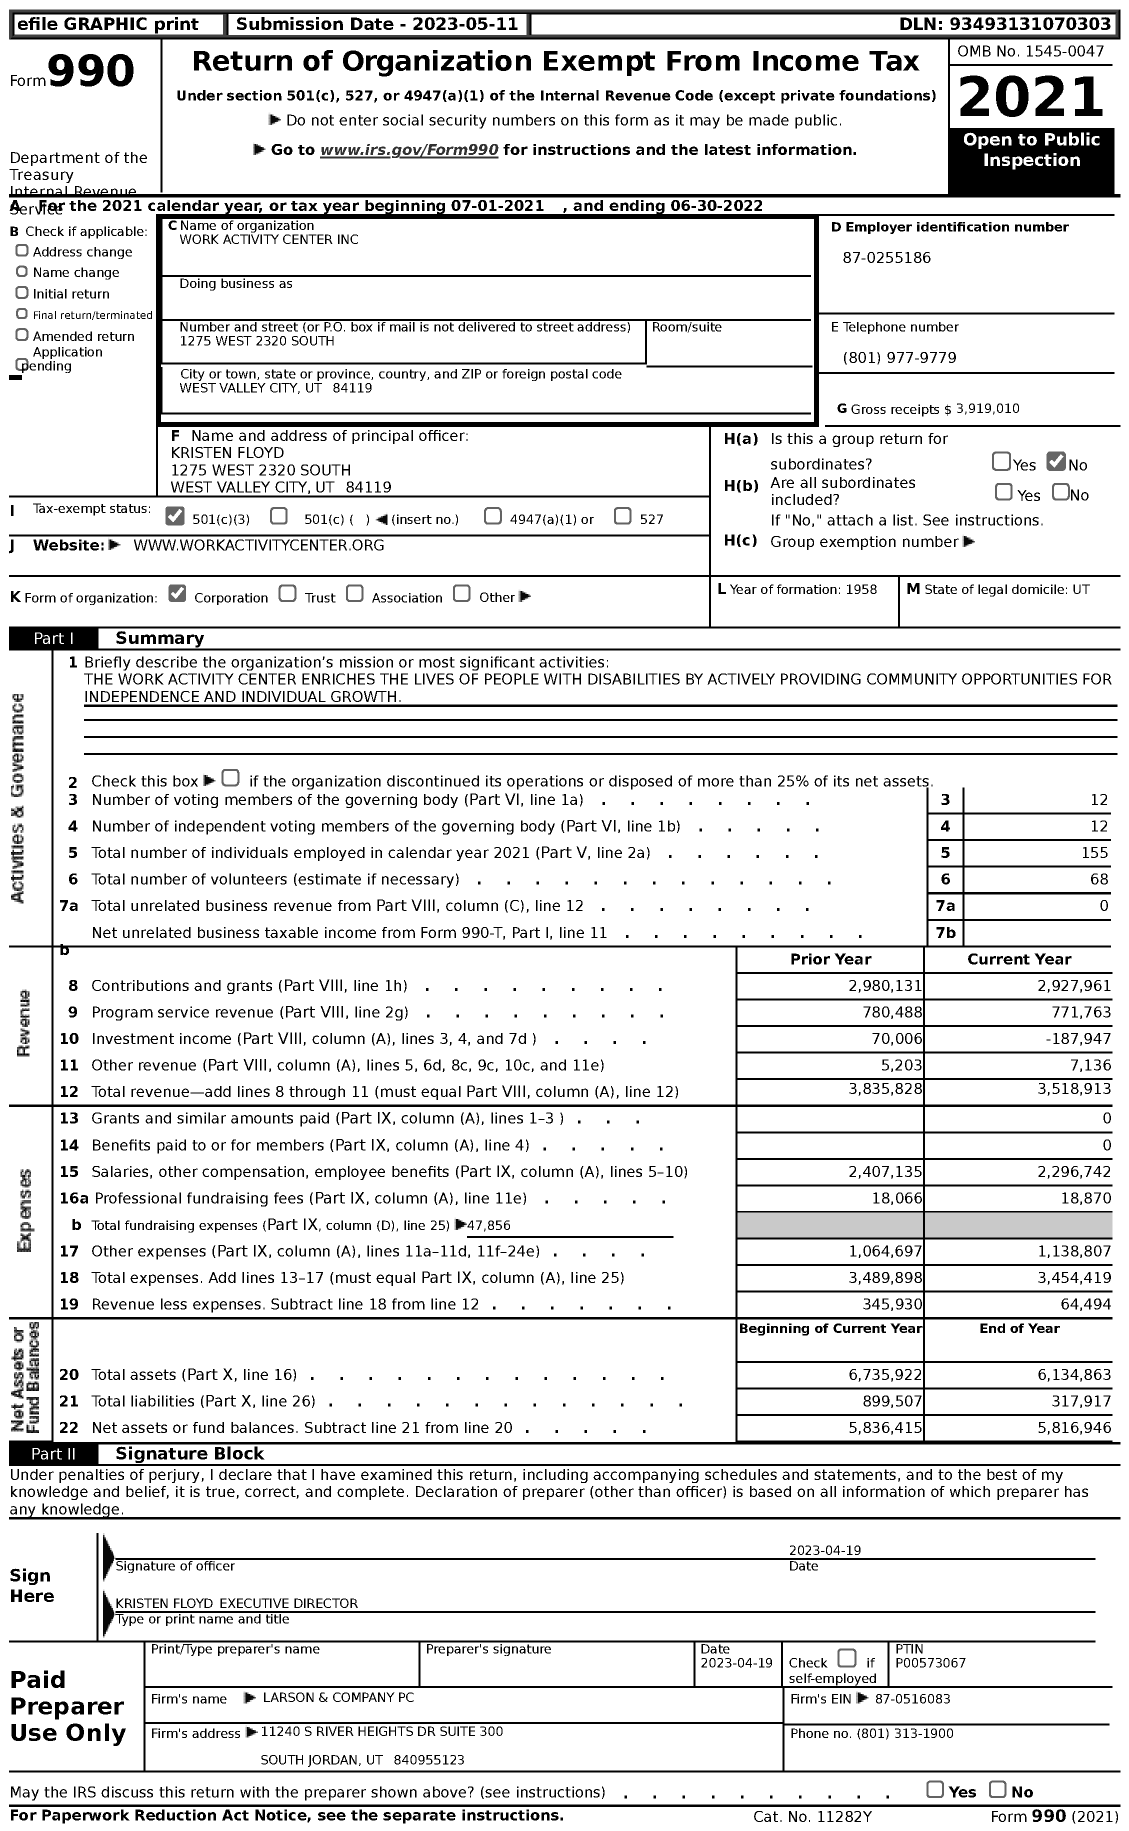 Image of first page of 2021 Form 990 for Work Activity Center